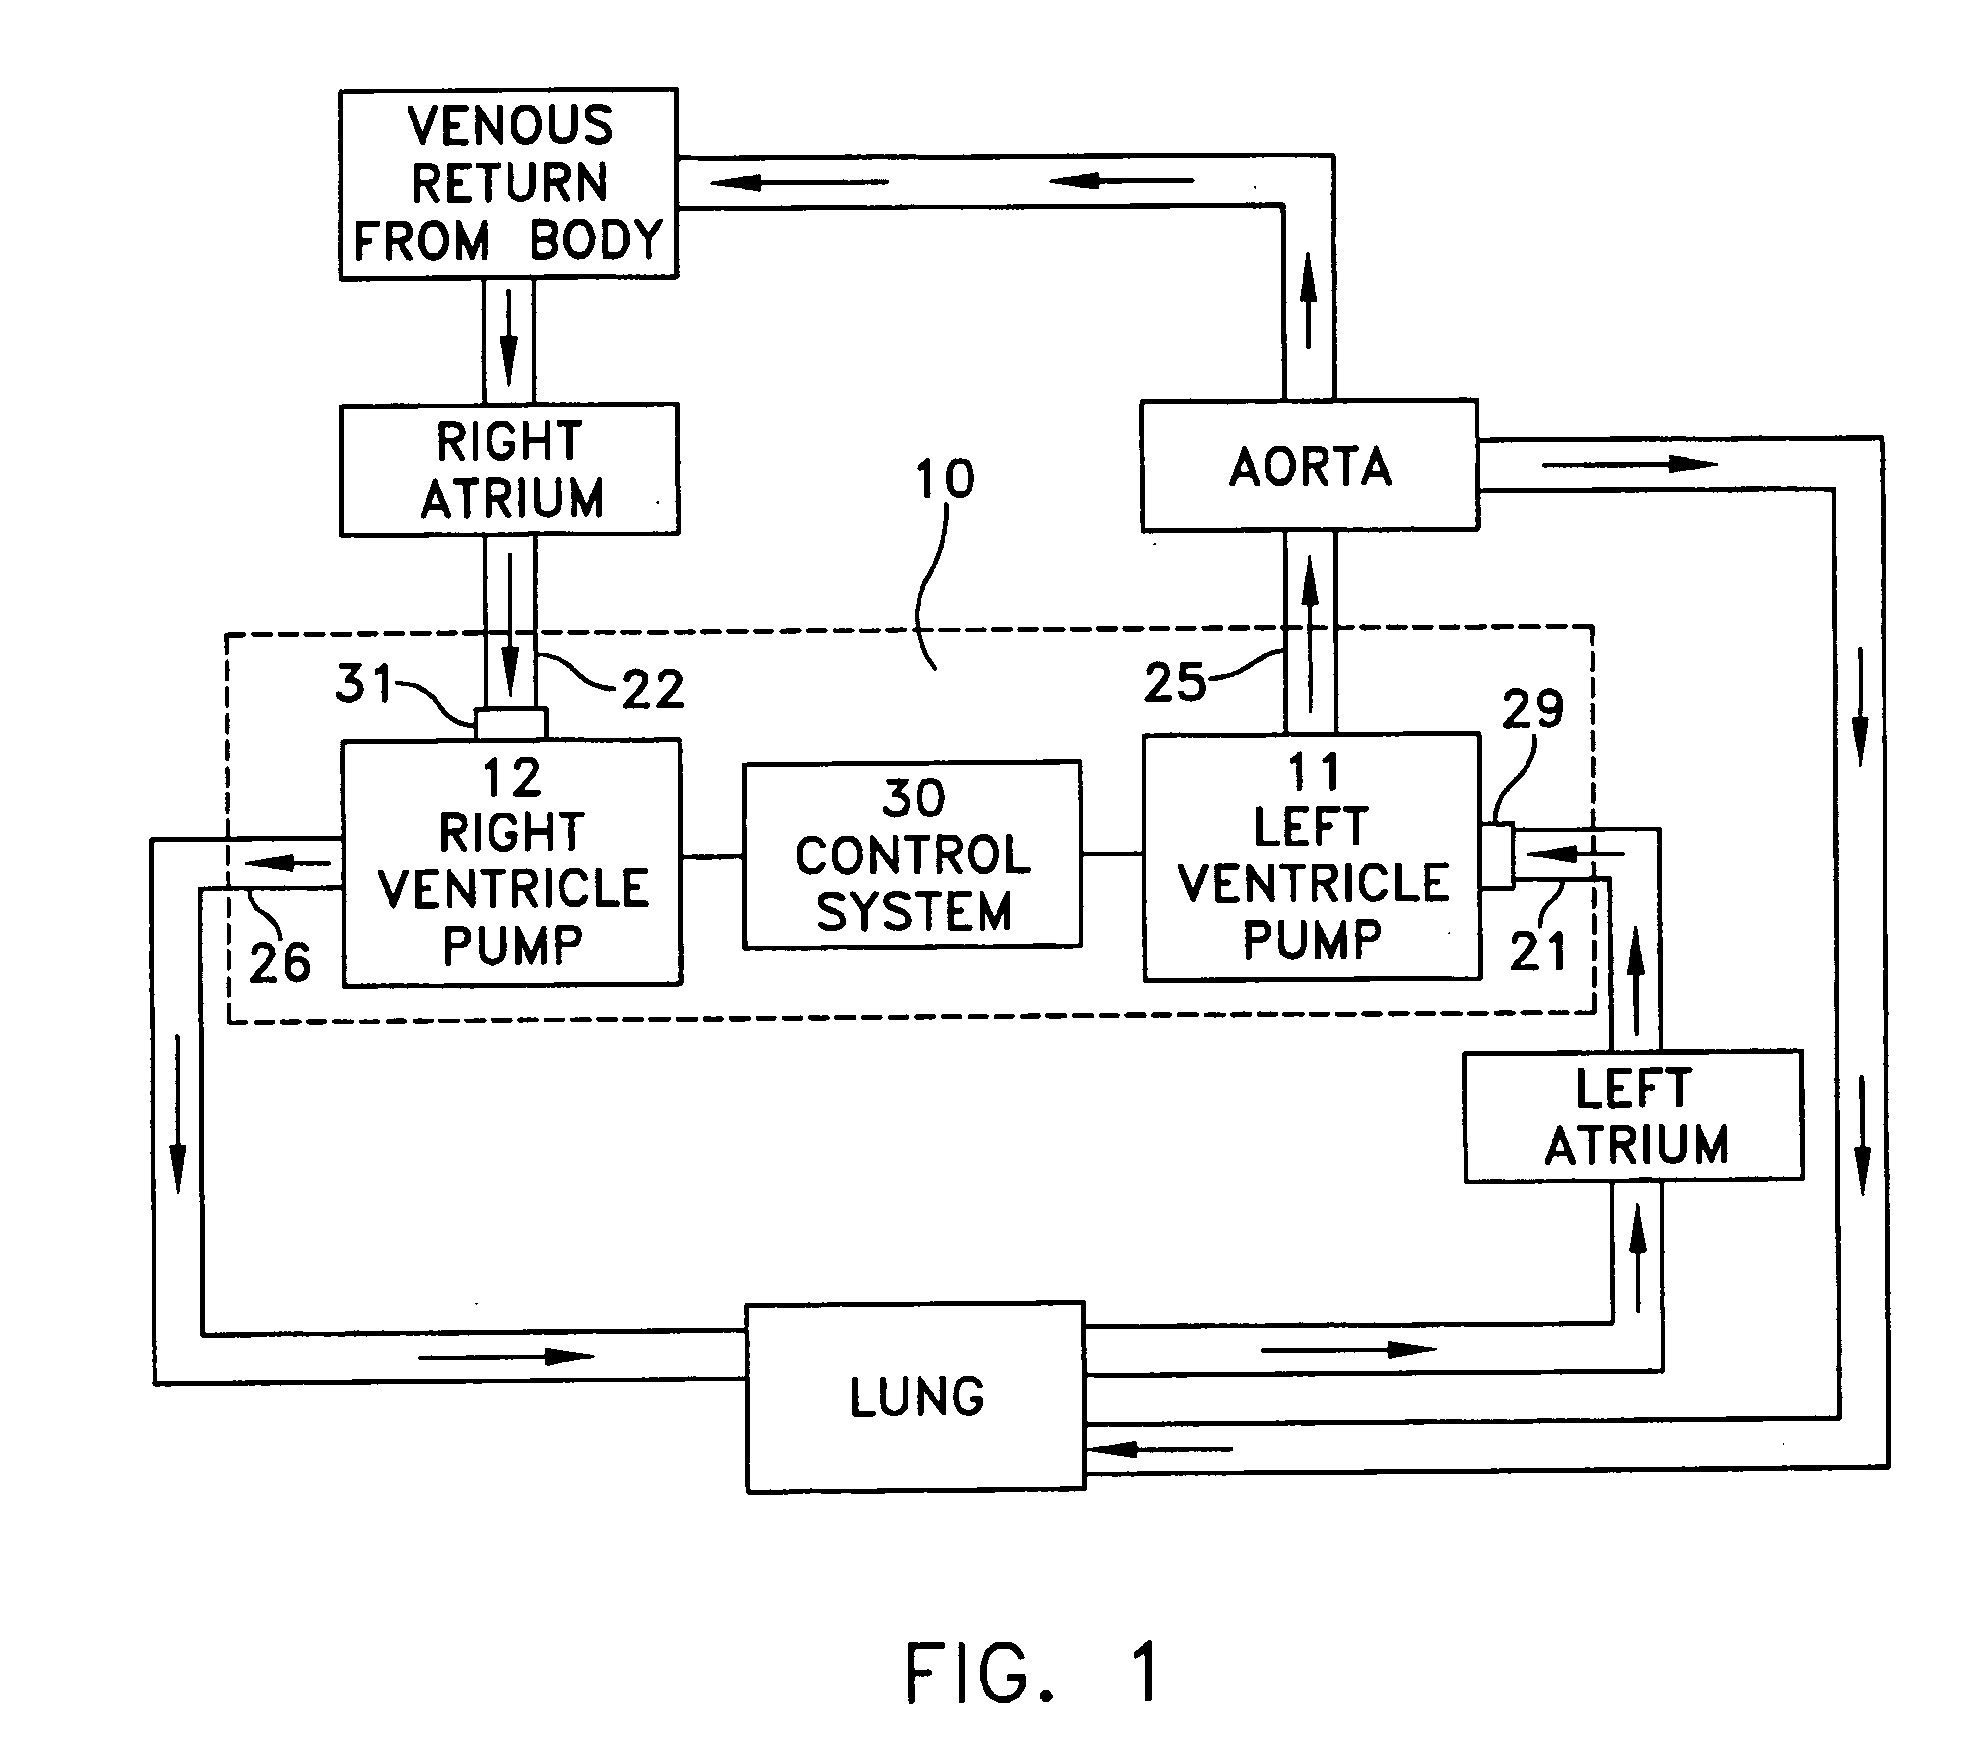 Method and apparatus for pumping blood